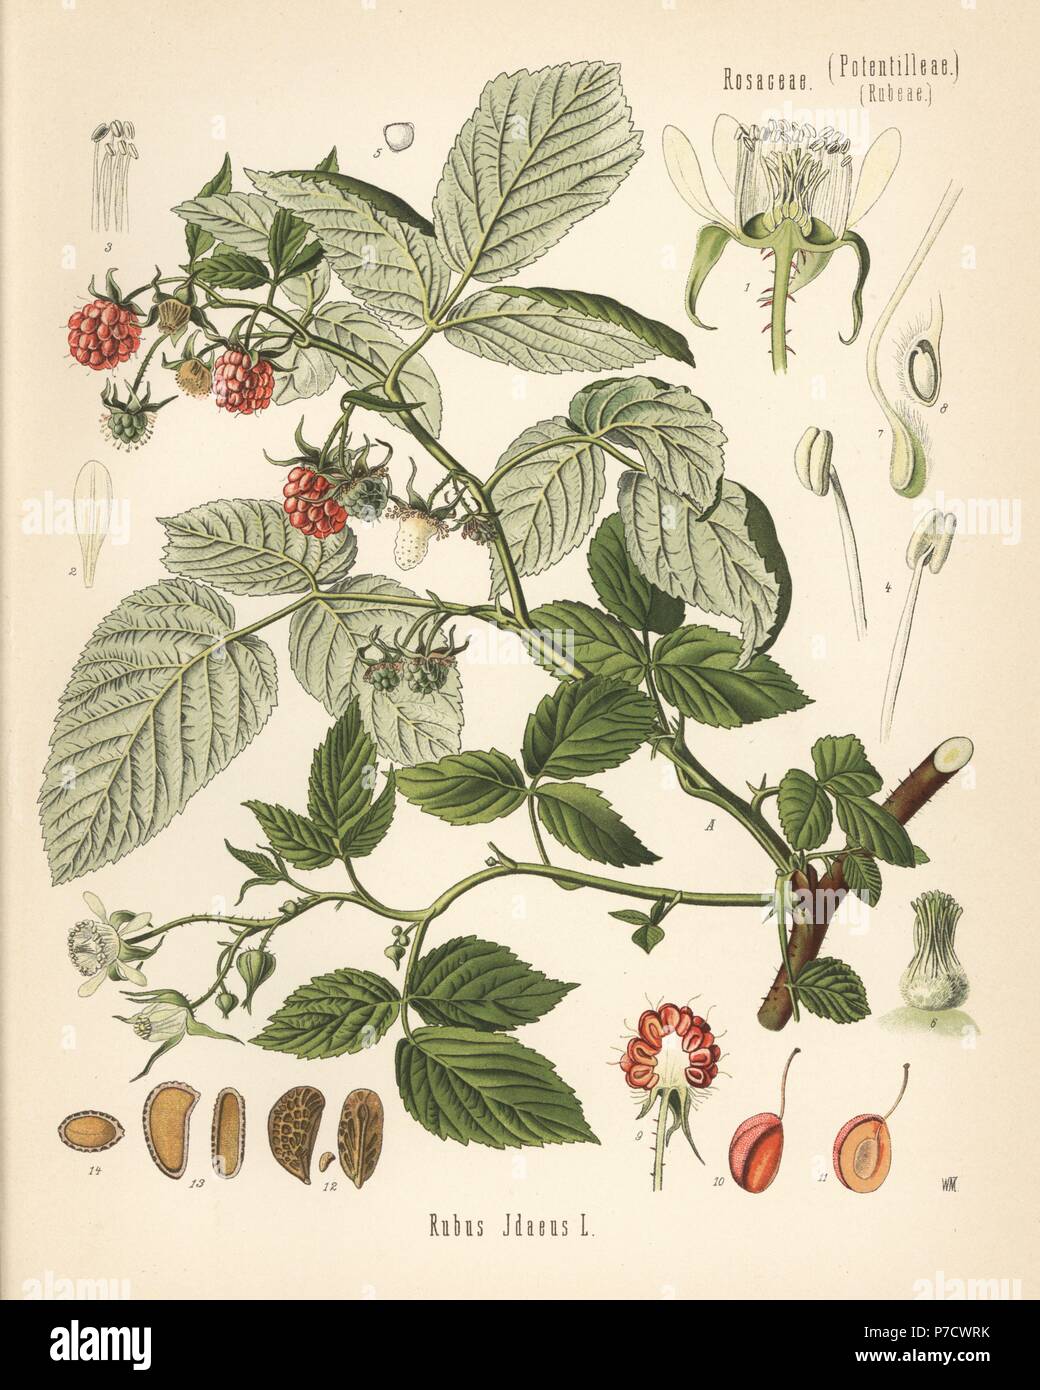 Raspberry, Rubus idaeus. Chromolithograph after a botanical illustration by Walther Muller from Hermann Adolph Koehler's Medicinal Plants, edited by Gustav Pabst, Koehler, Germany, 1887. Stock Photo